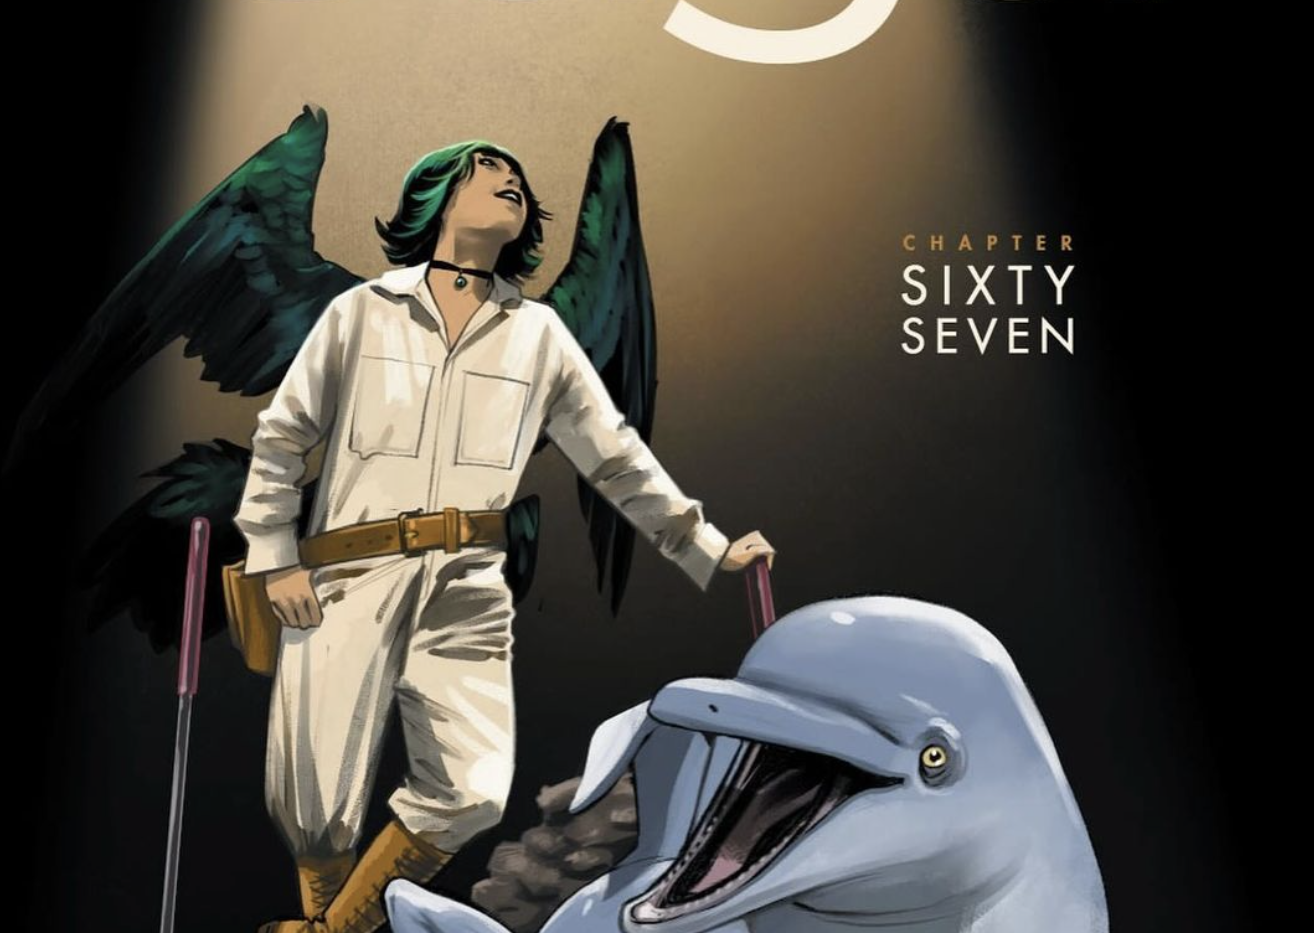 'Saga' returns this July with issue #67